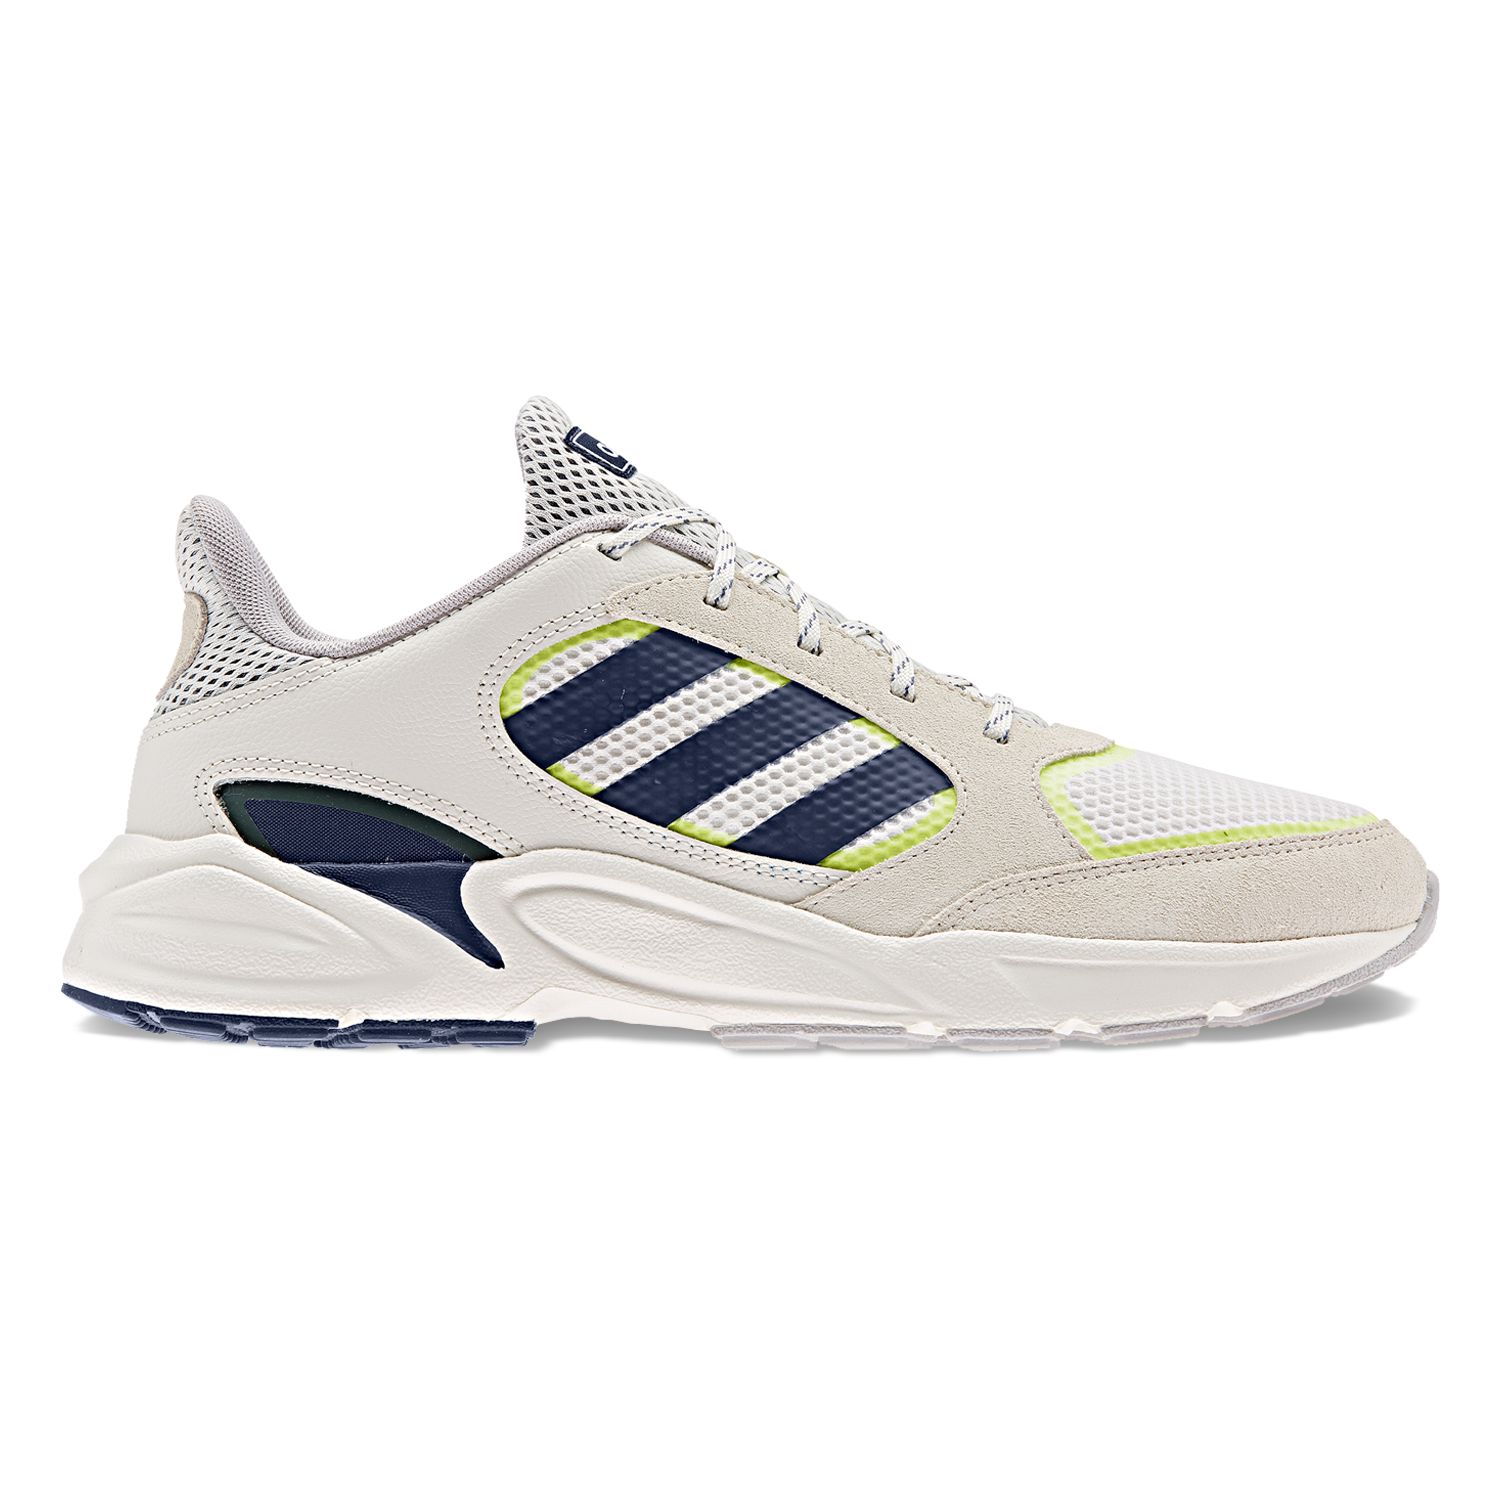 adidas clearance shoes